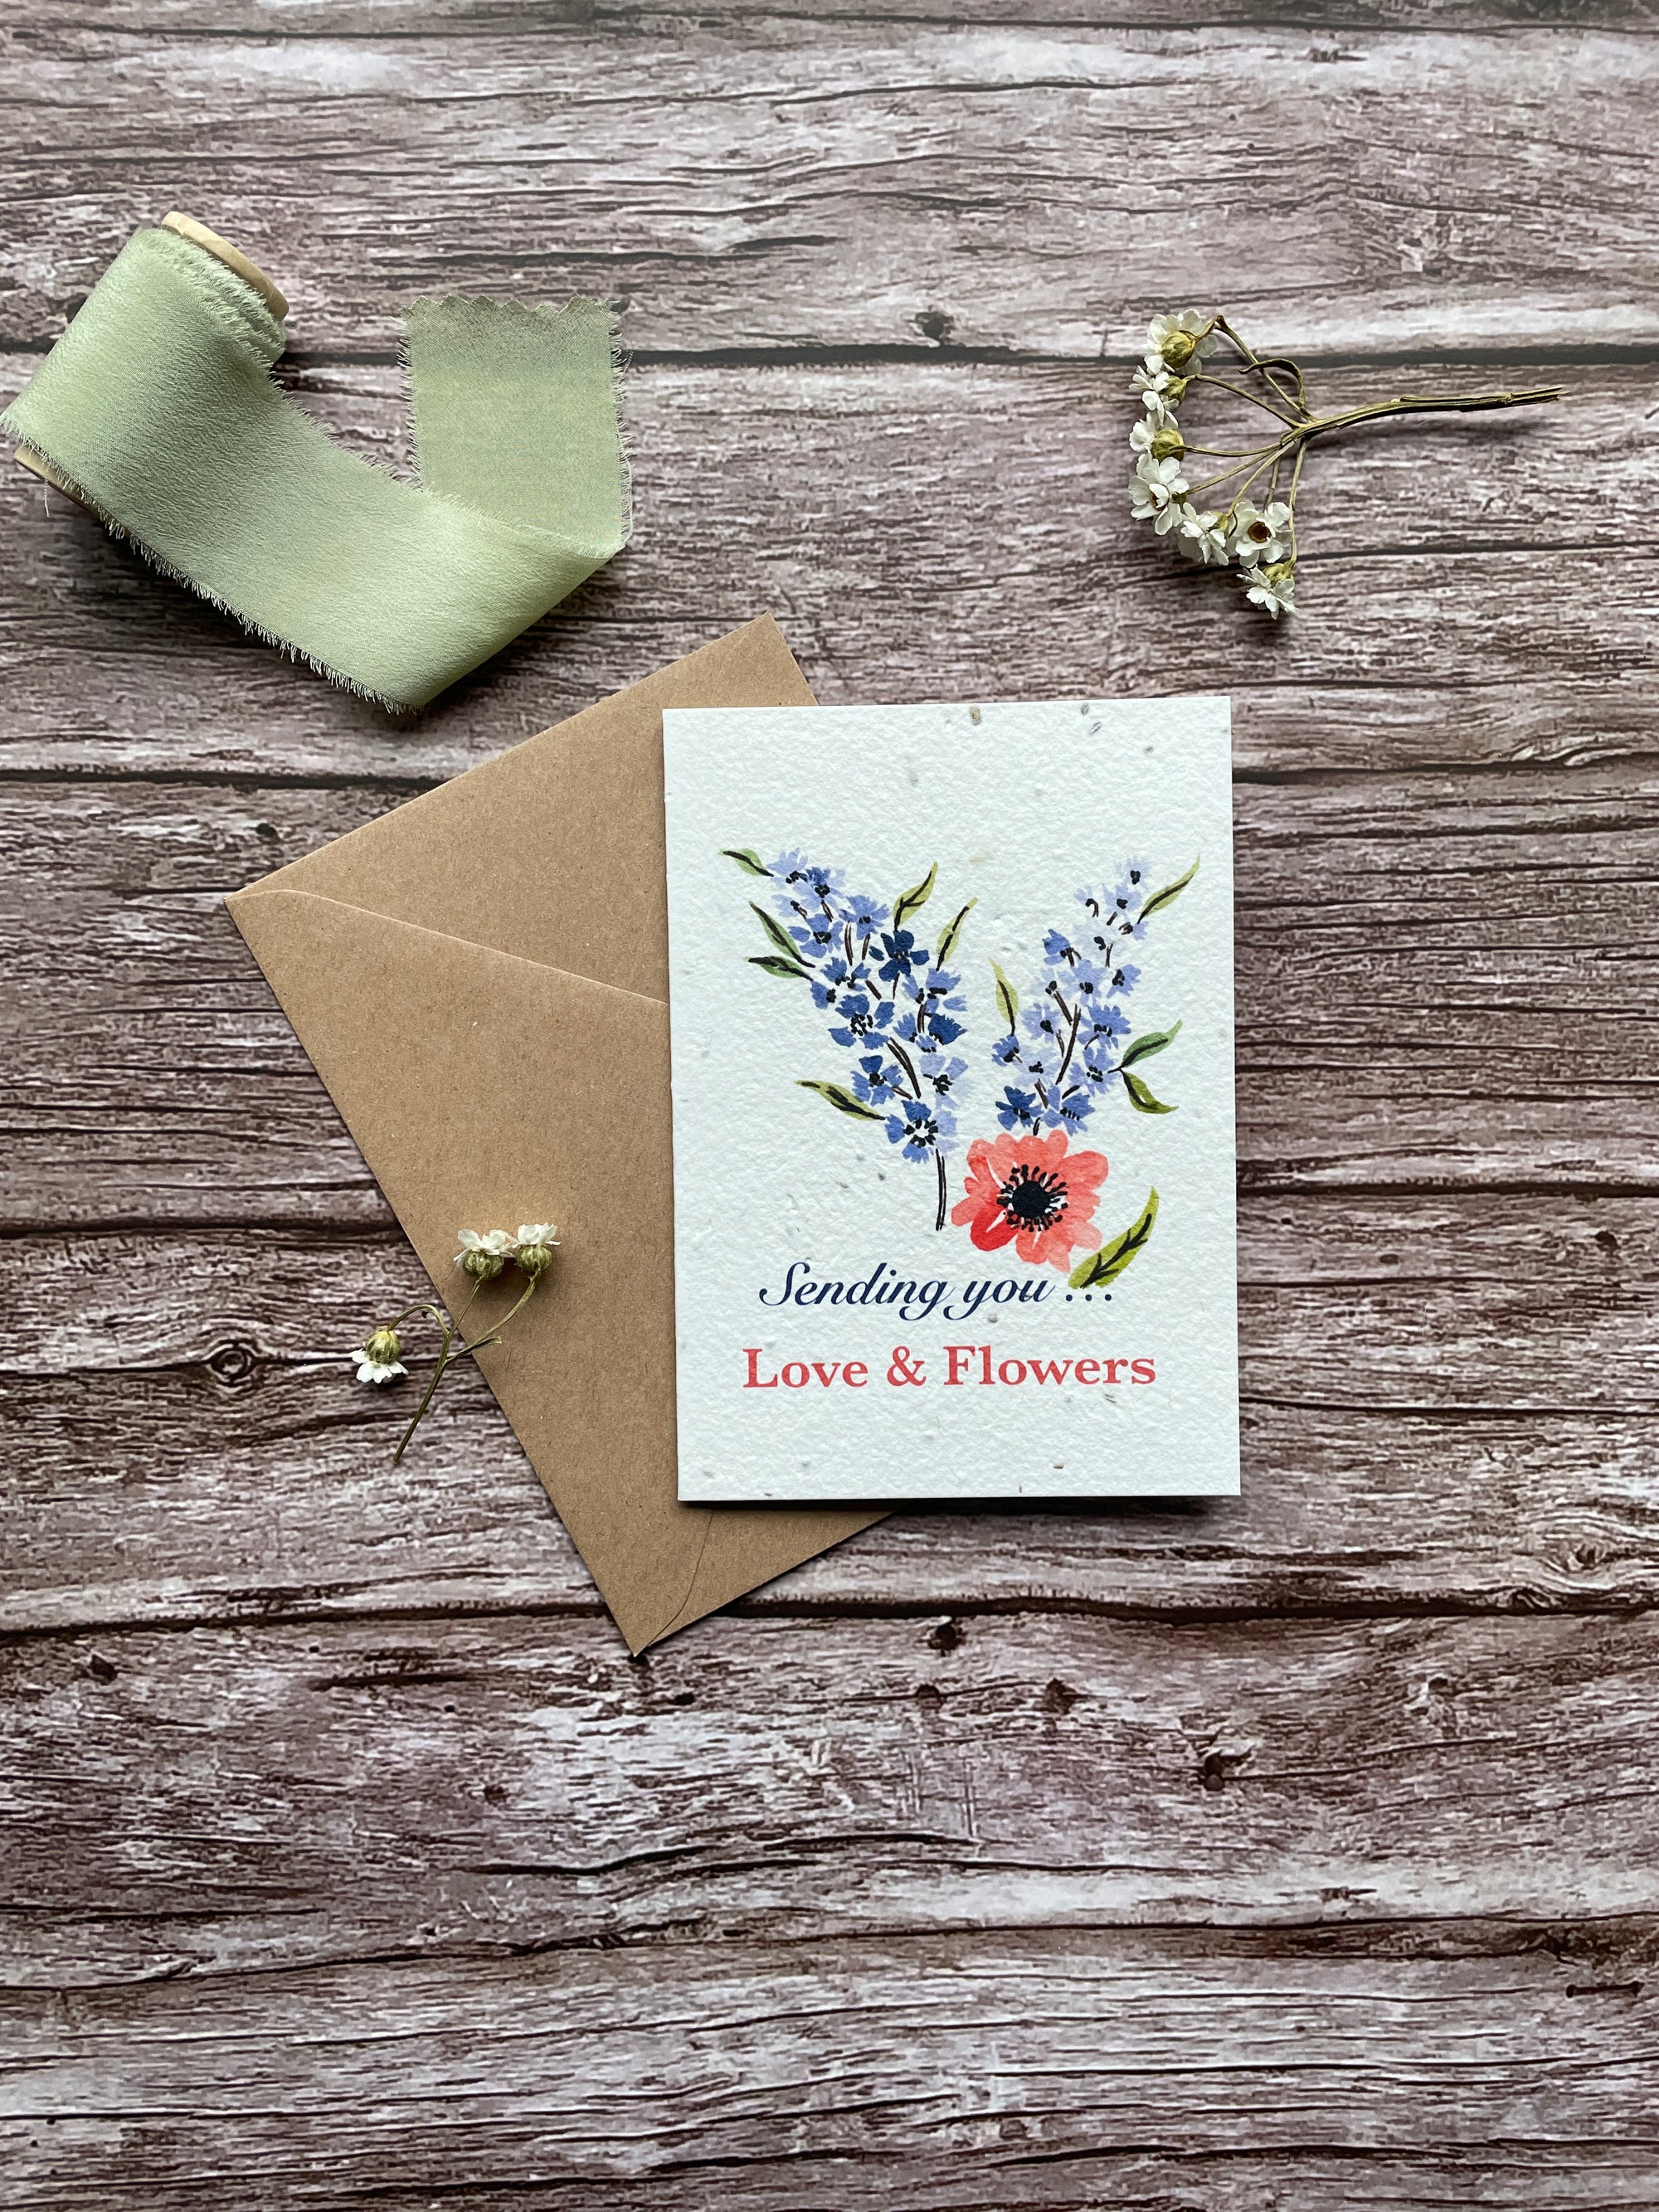 Love & Flowers Plantable Seed Paper Card